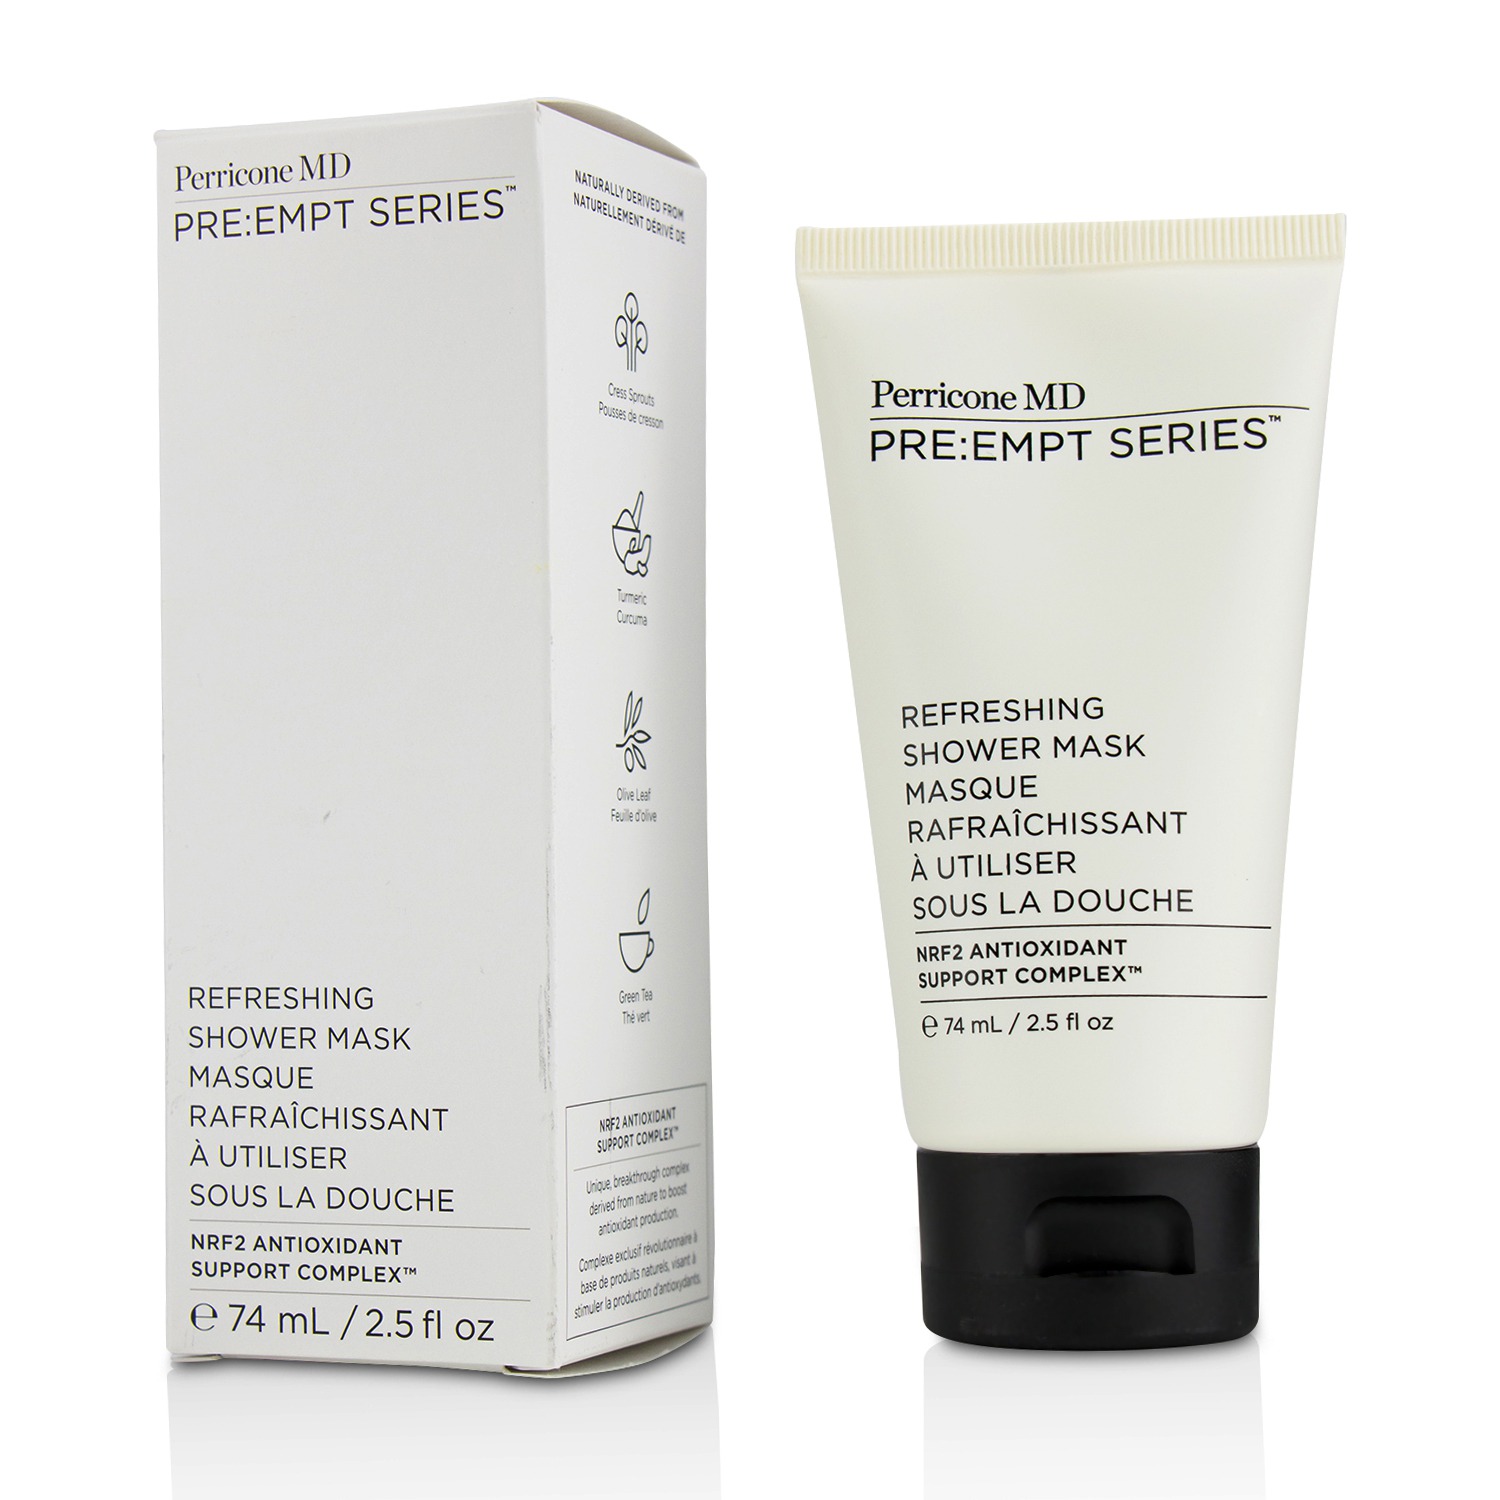 Pre:Empt Series Refreshing Shower Mask Perricone MD Image